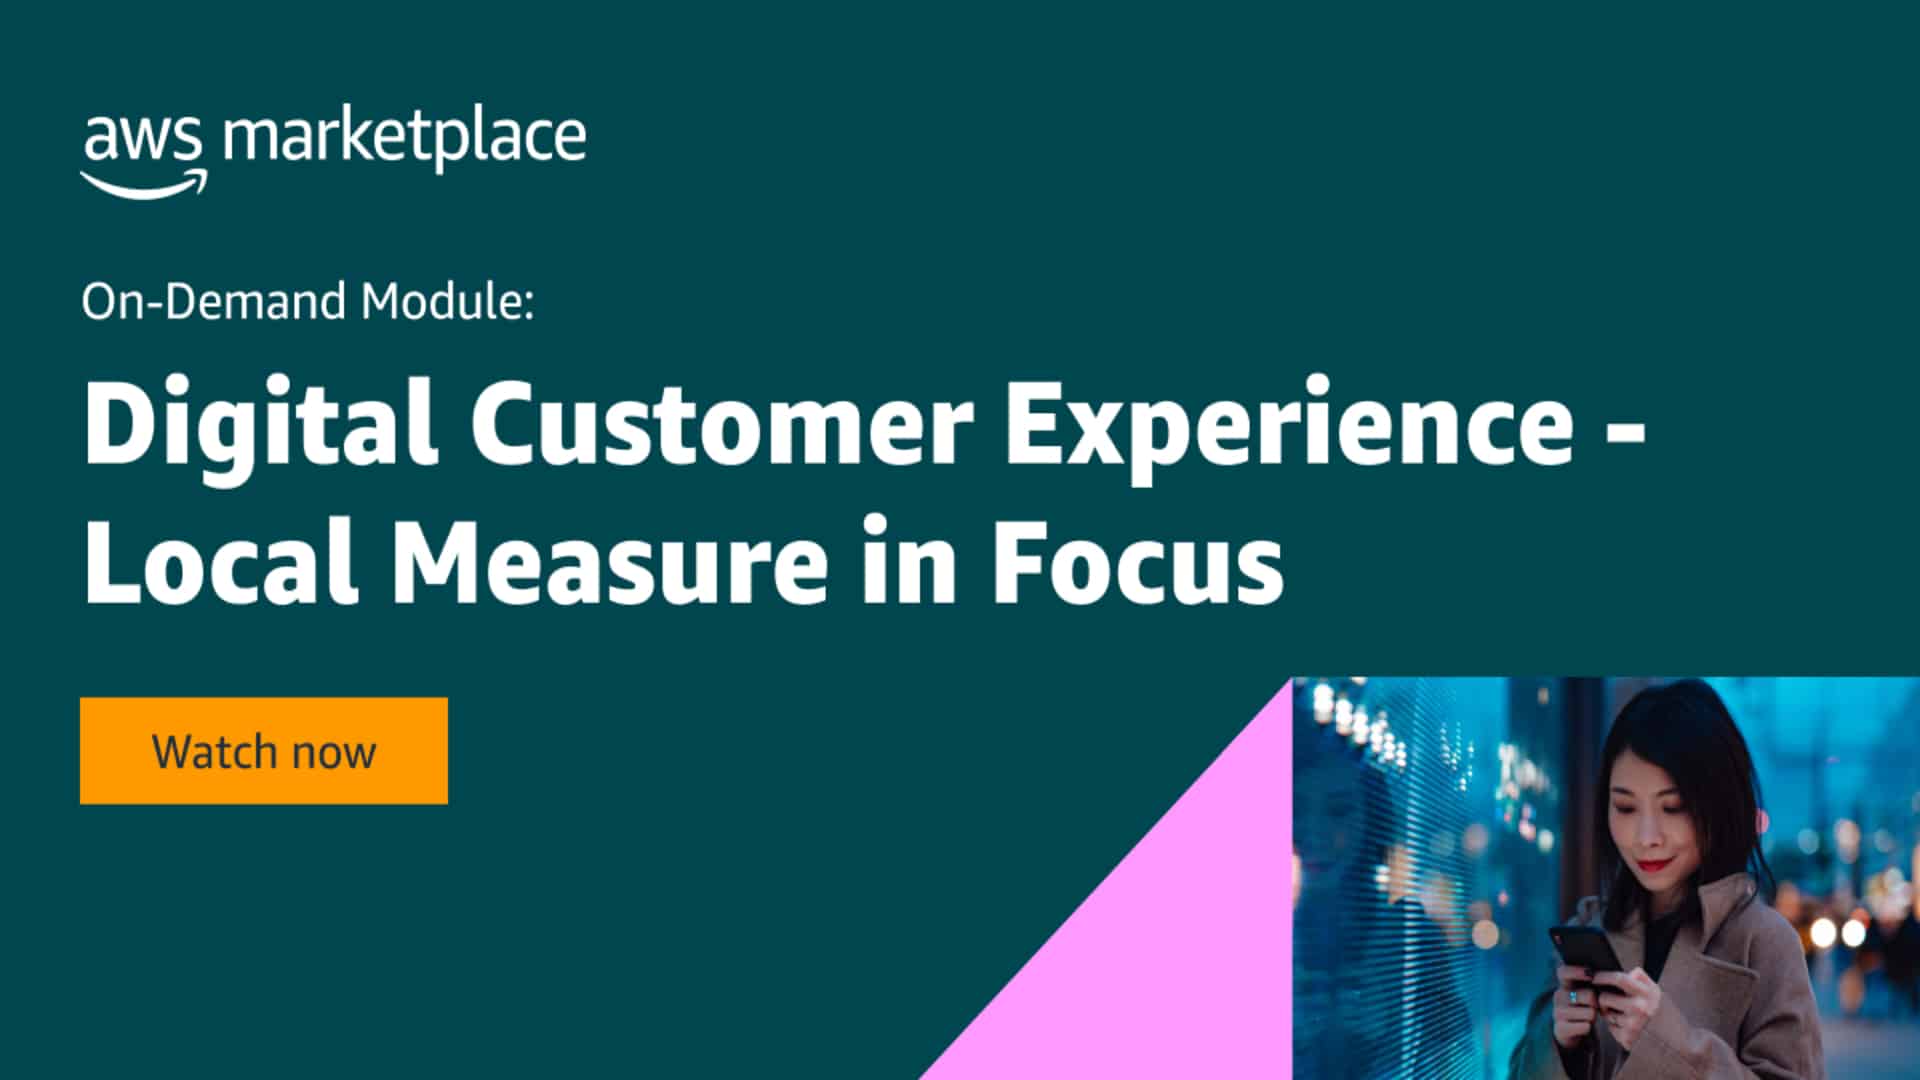 Personalize each digital customer experience